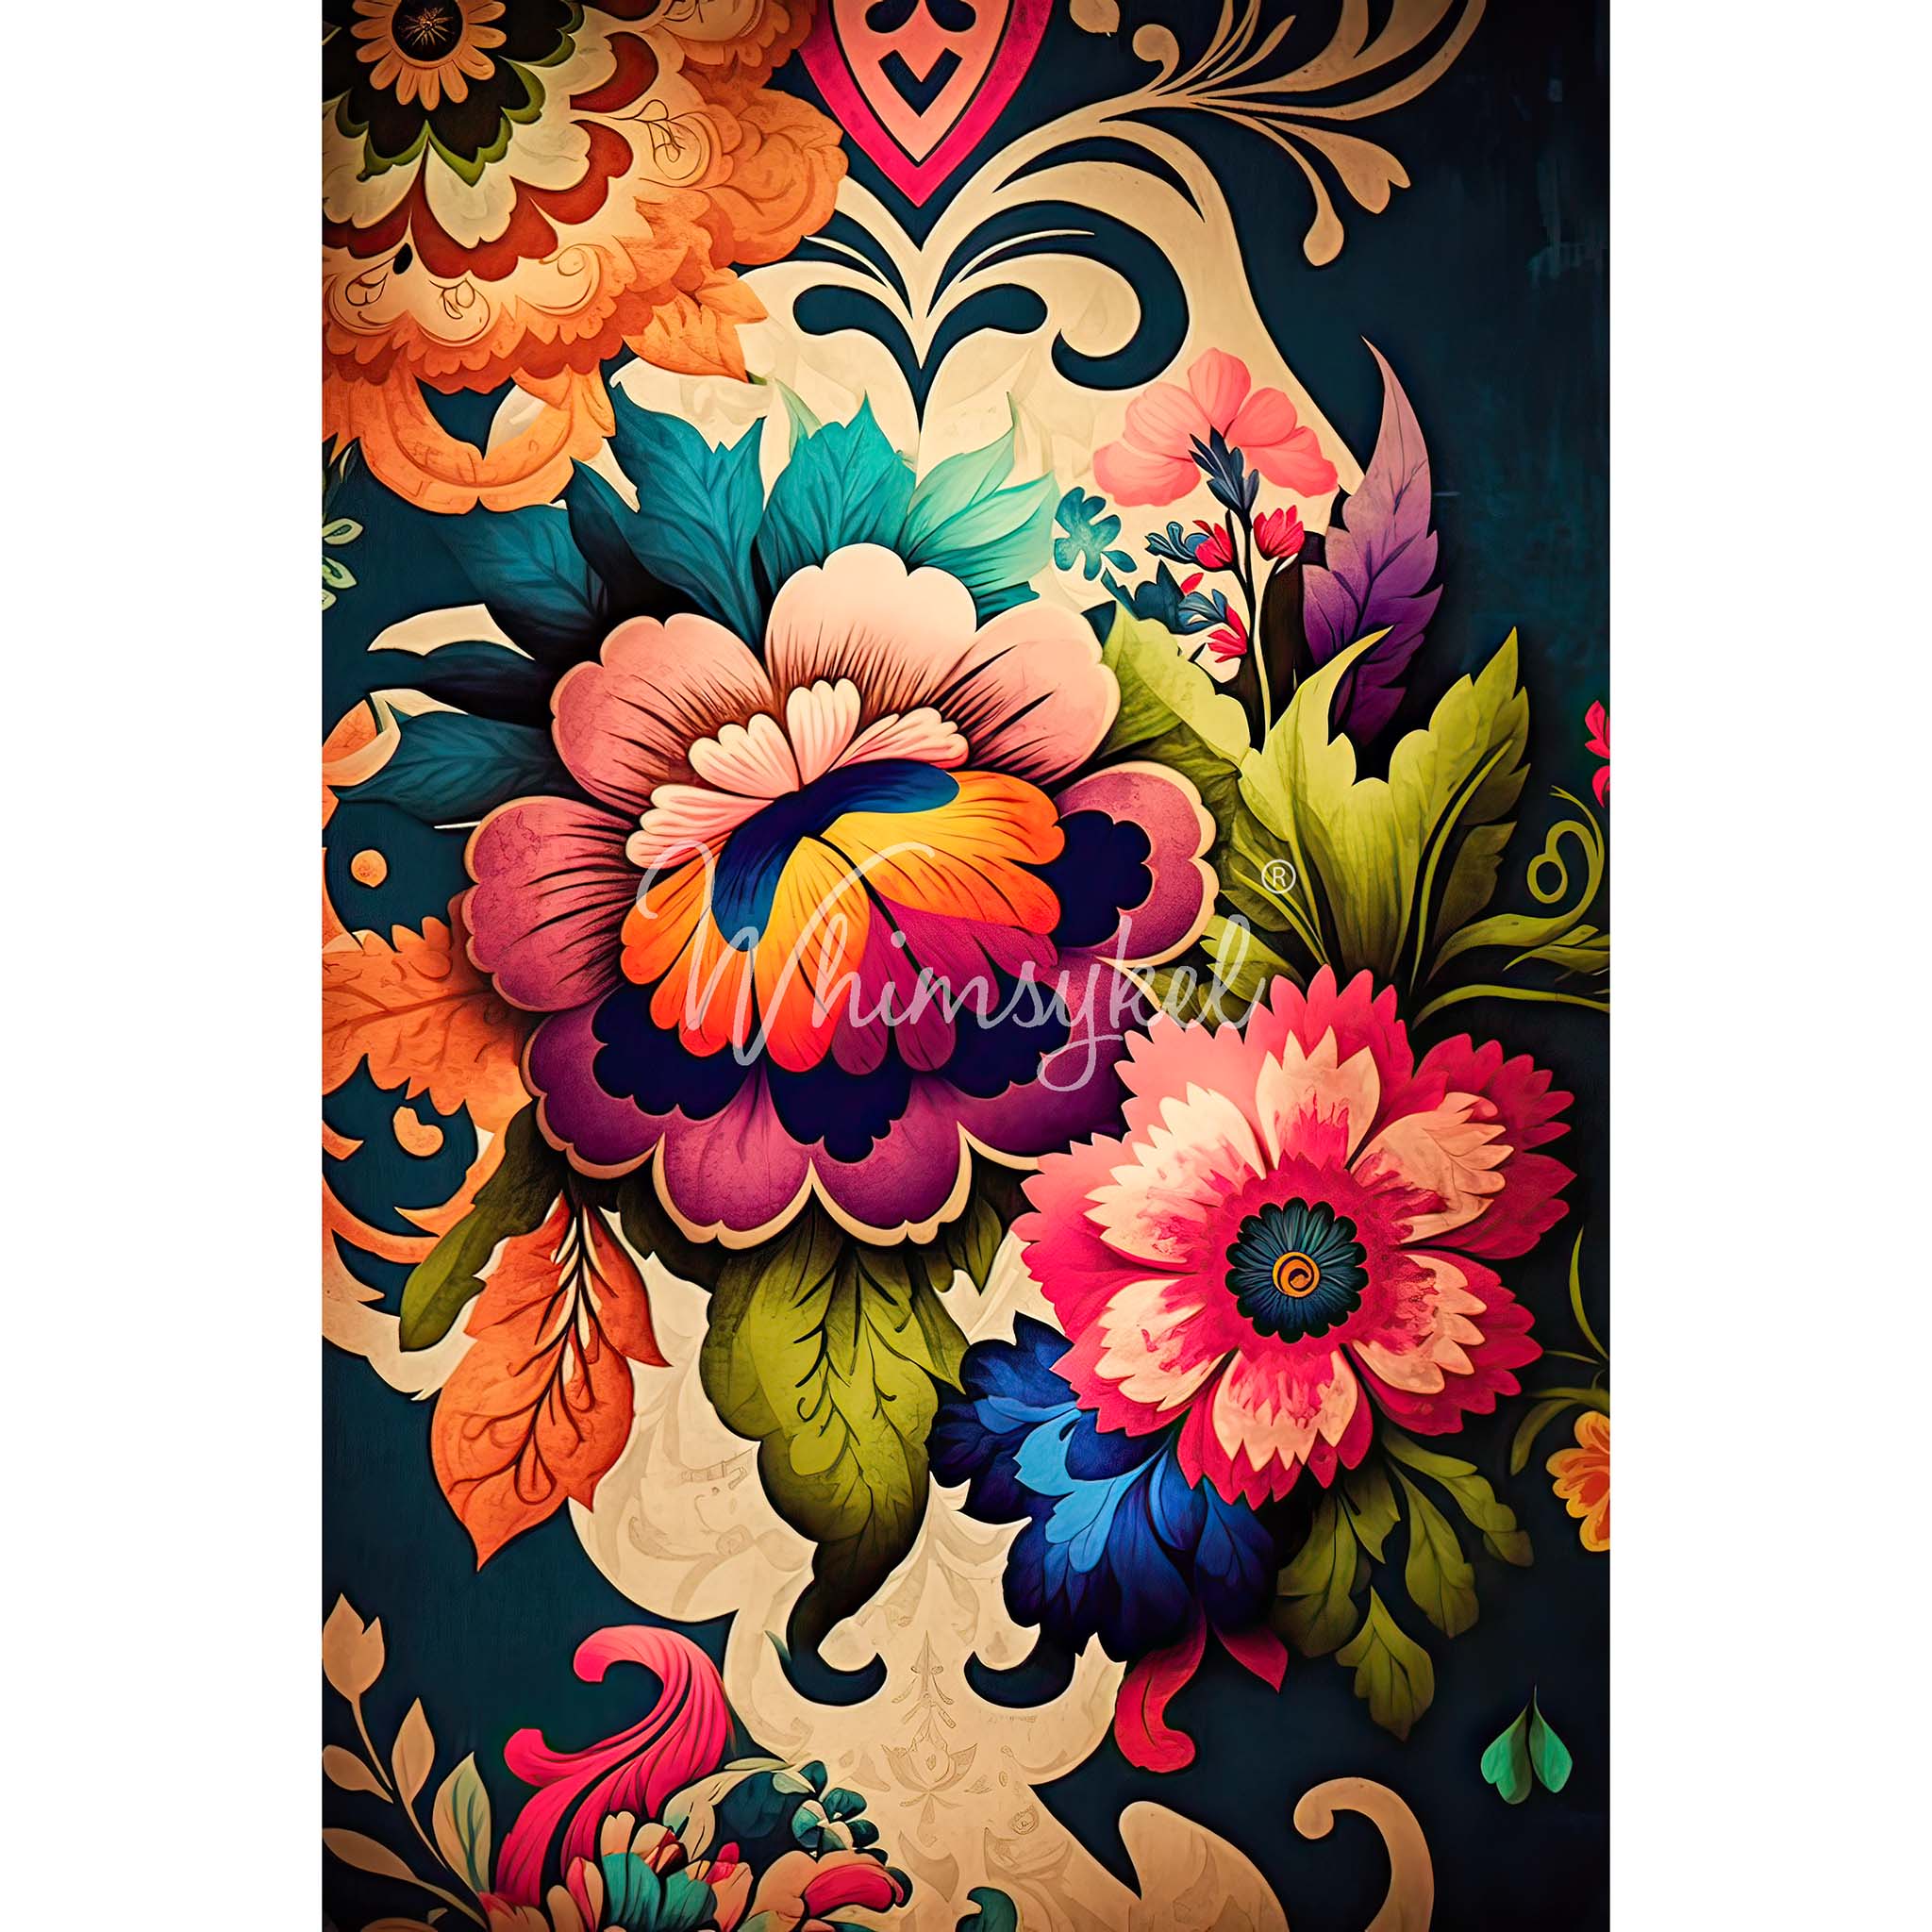 A tissue paper design that features a colorful and vibrant representation of boho-inspired flowers that exude a playful and cheerful vibe. White borders are on the sides.